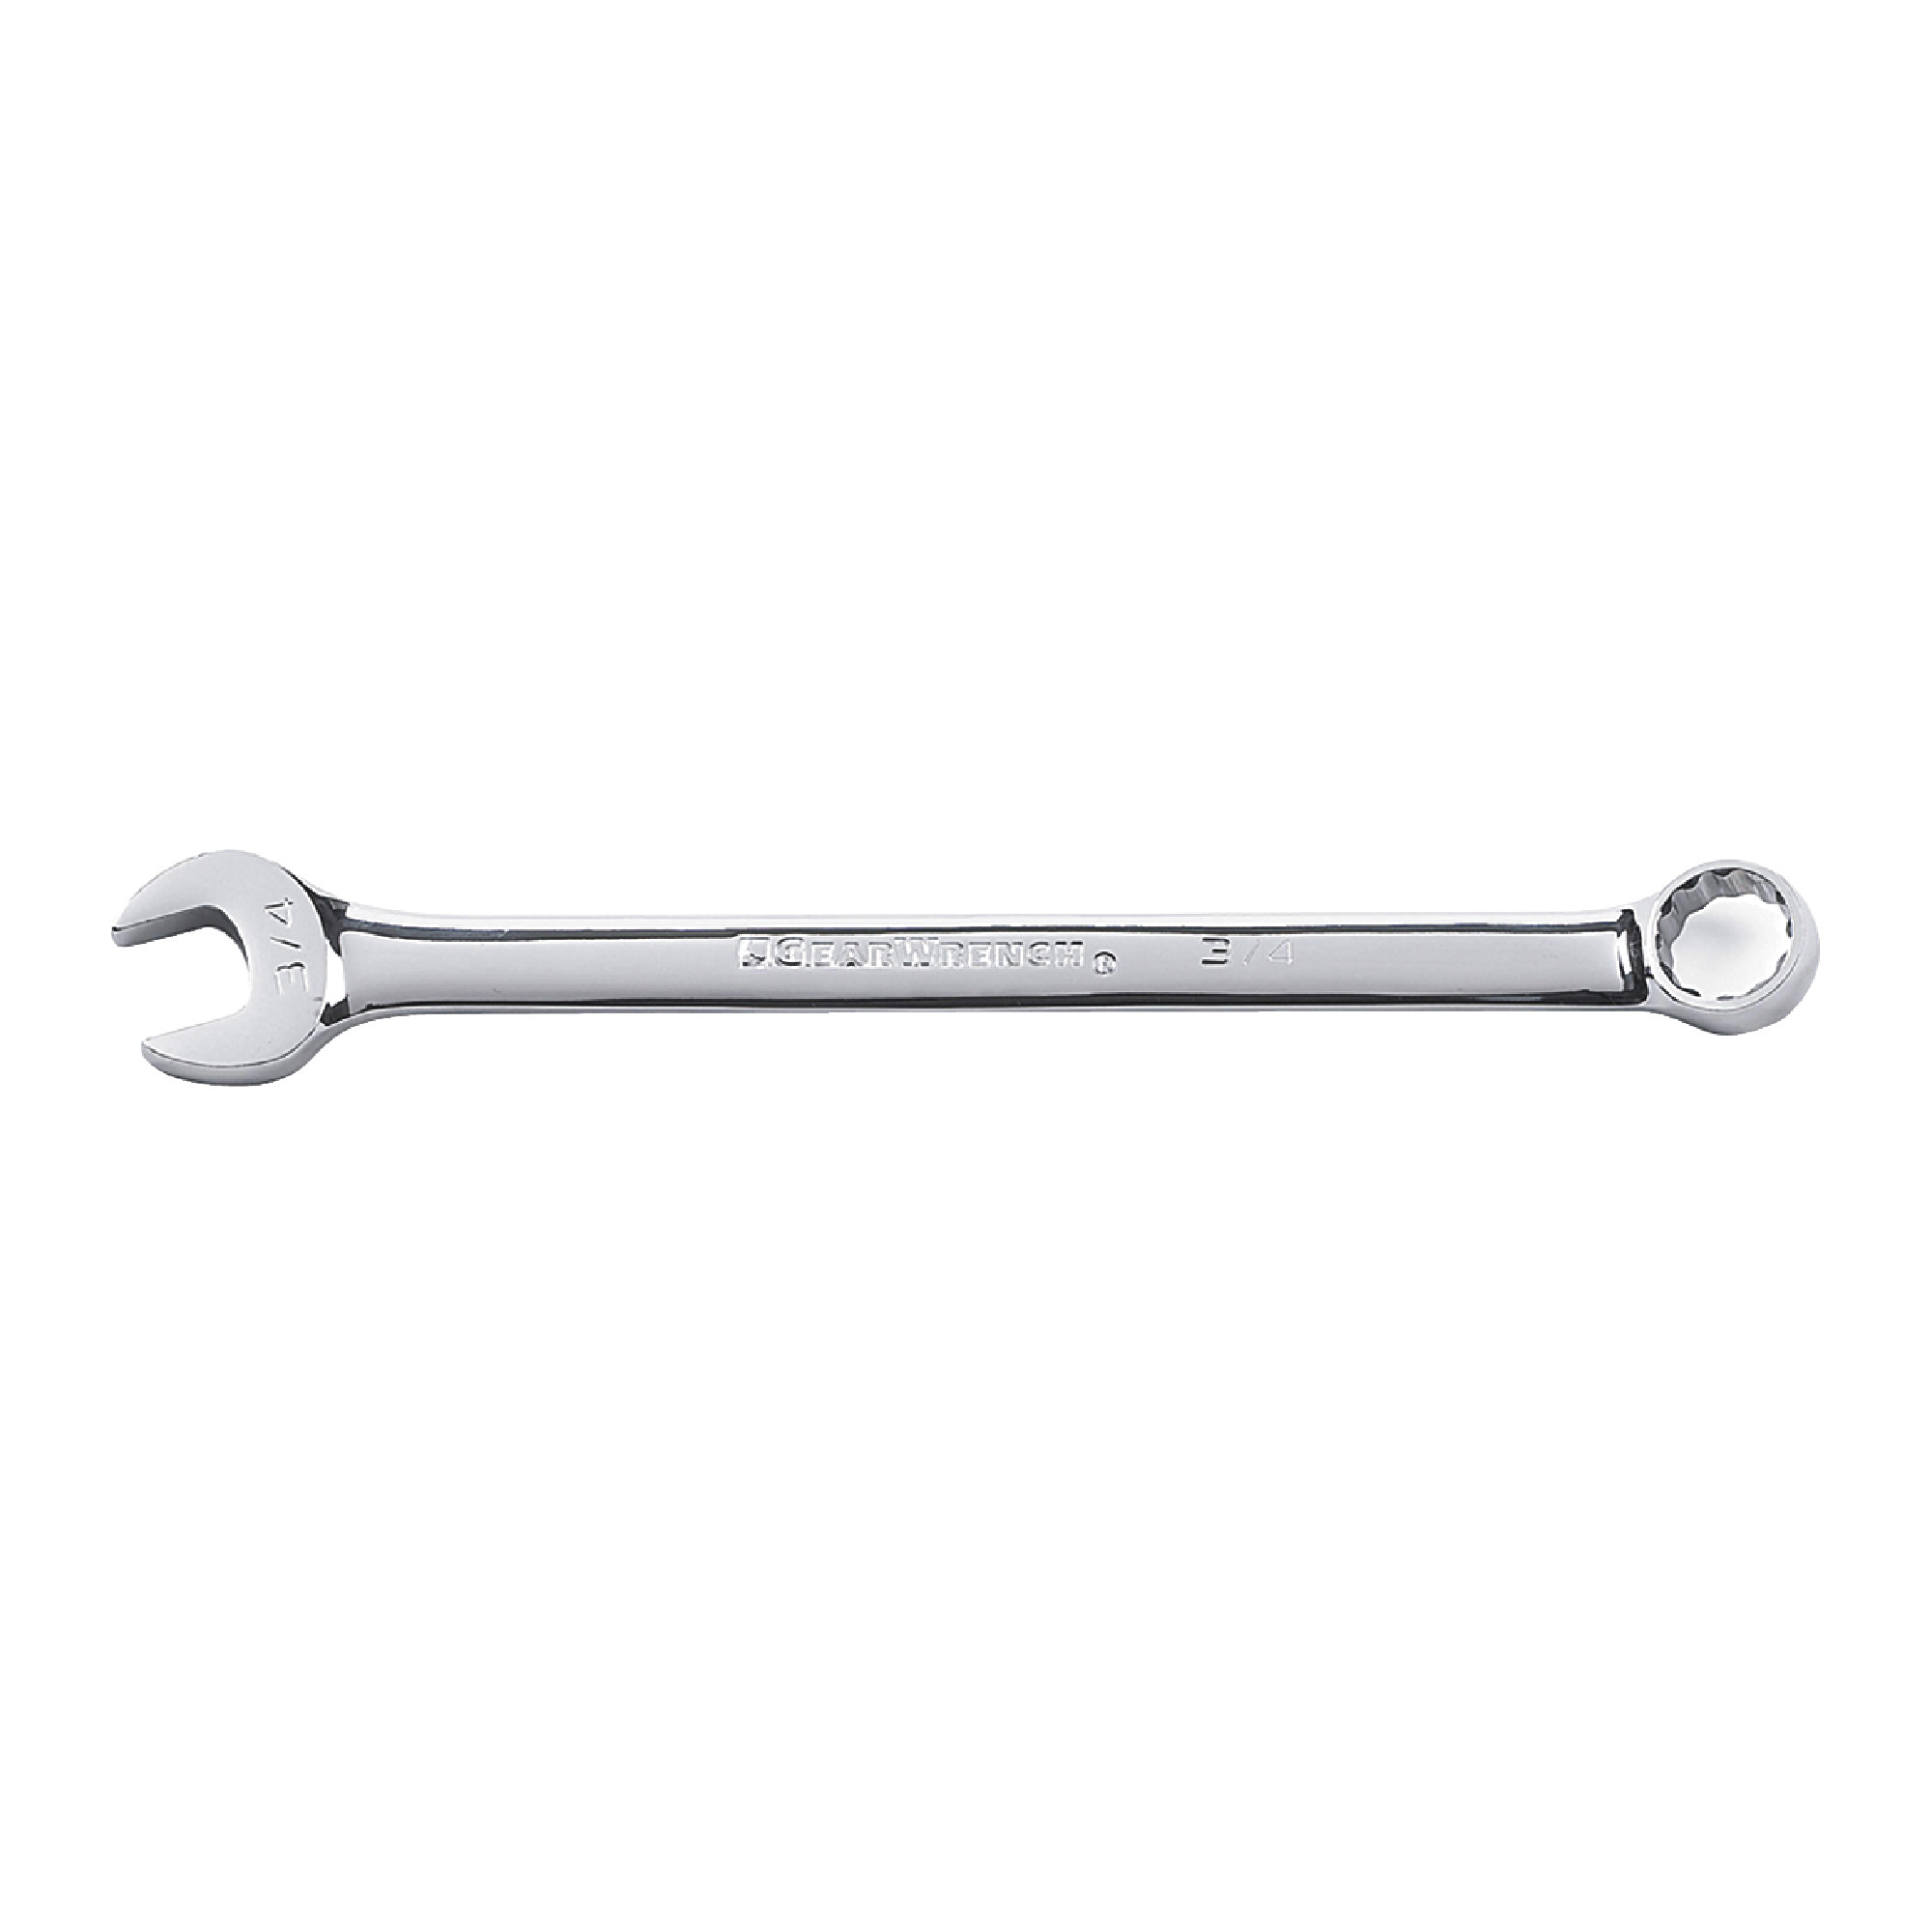 17mm 12 Point Long Pattern Combination Wrench